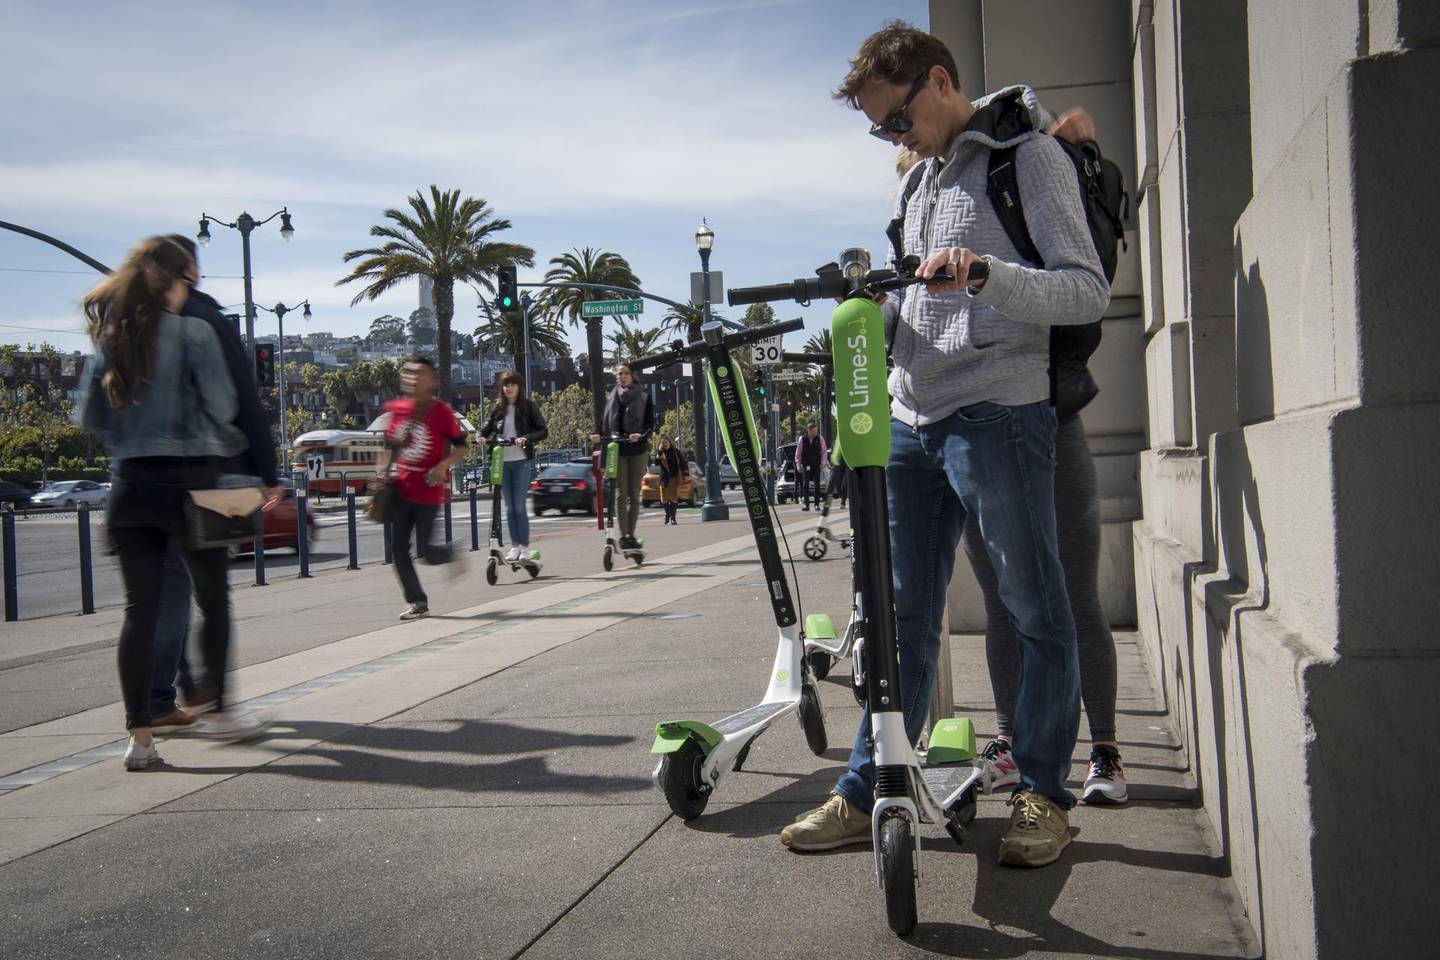 A person uses a smartphone to unlock Neutron Holdings Inc. LimeBike shared electric scooter on the Embarcadero in San Francisco, California, U.S., on Thursday, May 3, 2018. City officials, eager to do something about the electric scooters issue, are sending cease-and-desist letters and are planning to require permits soon, while impounding any that they say are parked illegally. Photographer: David Paul Morris/Bloomberg